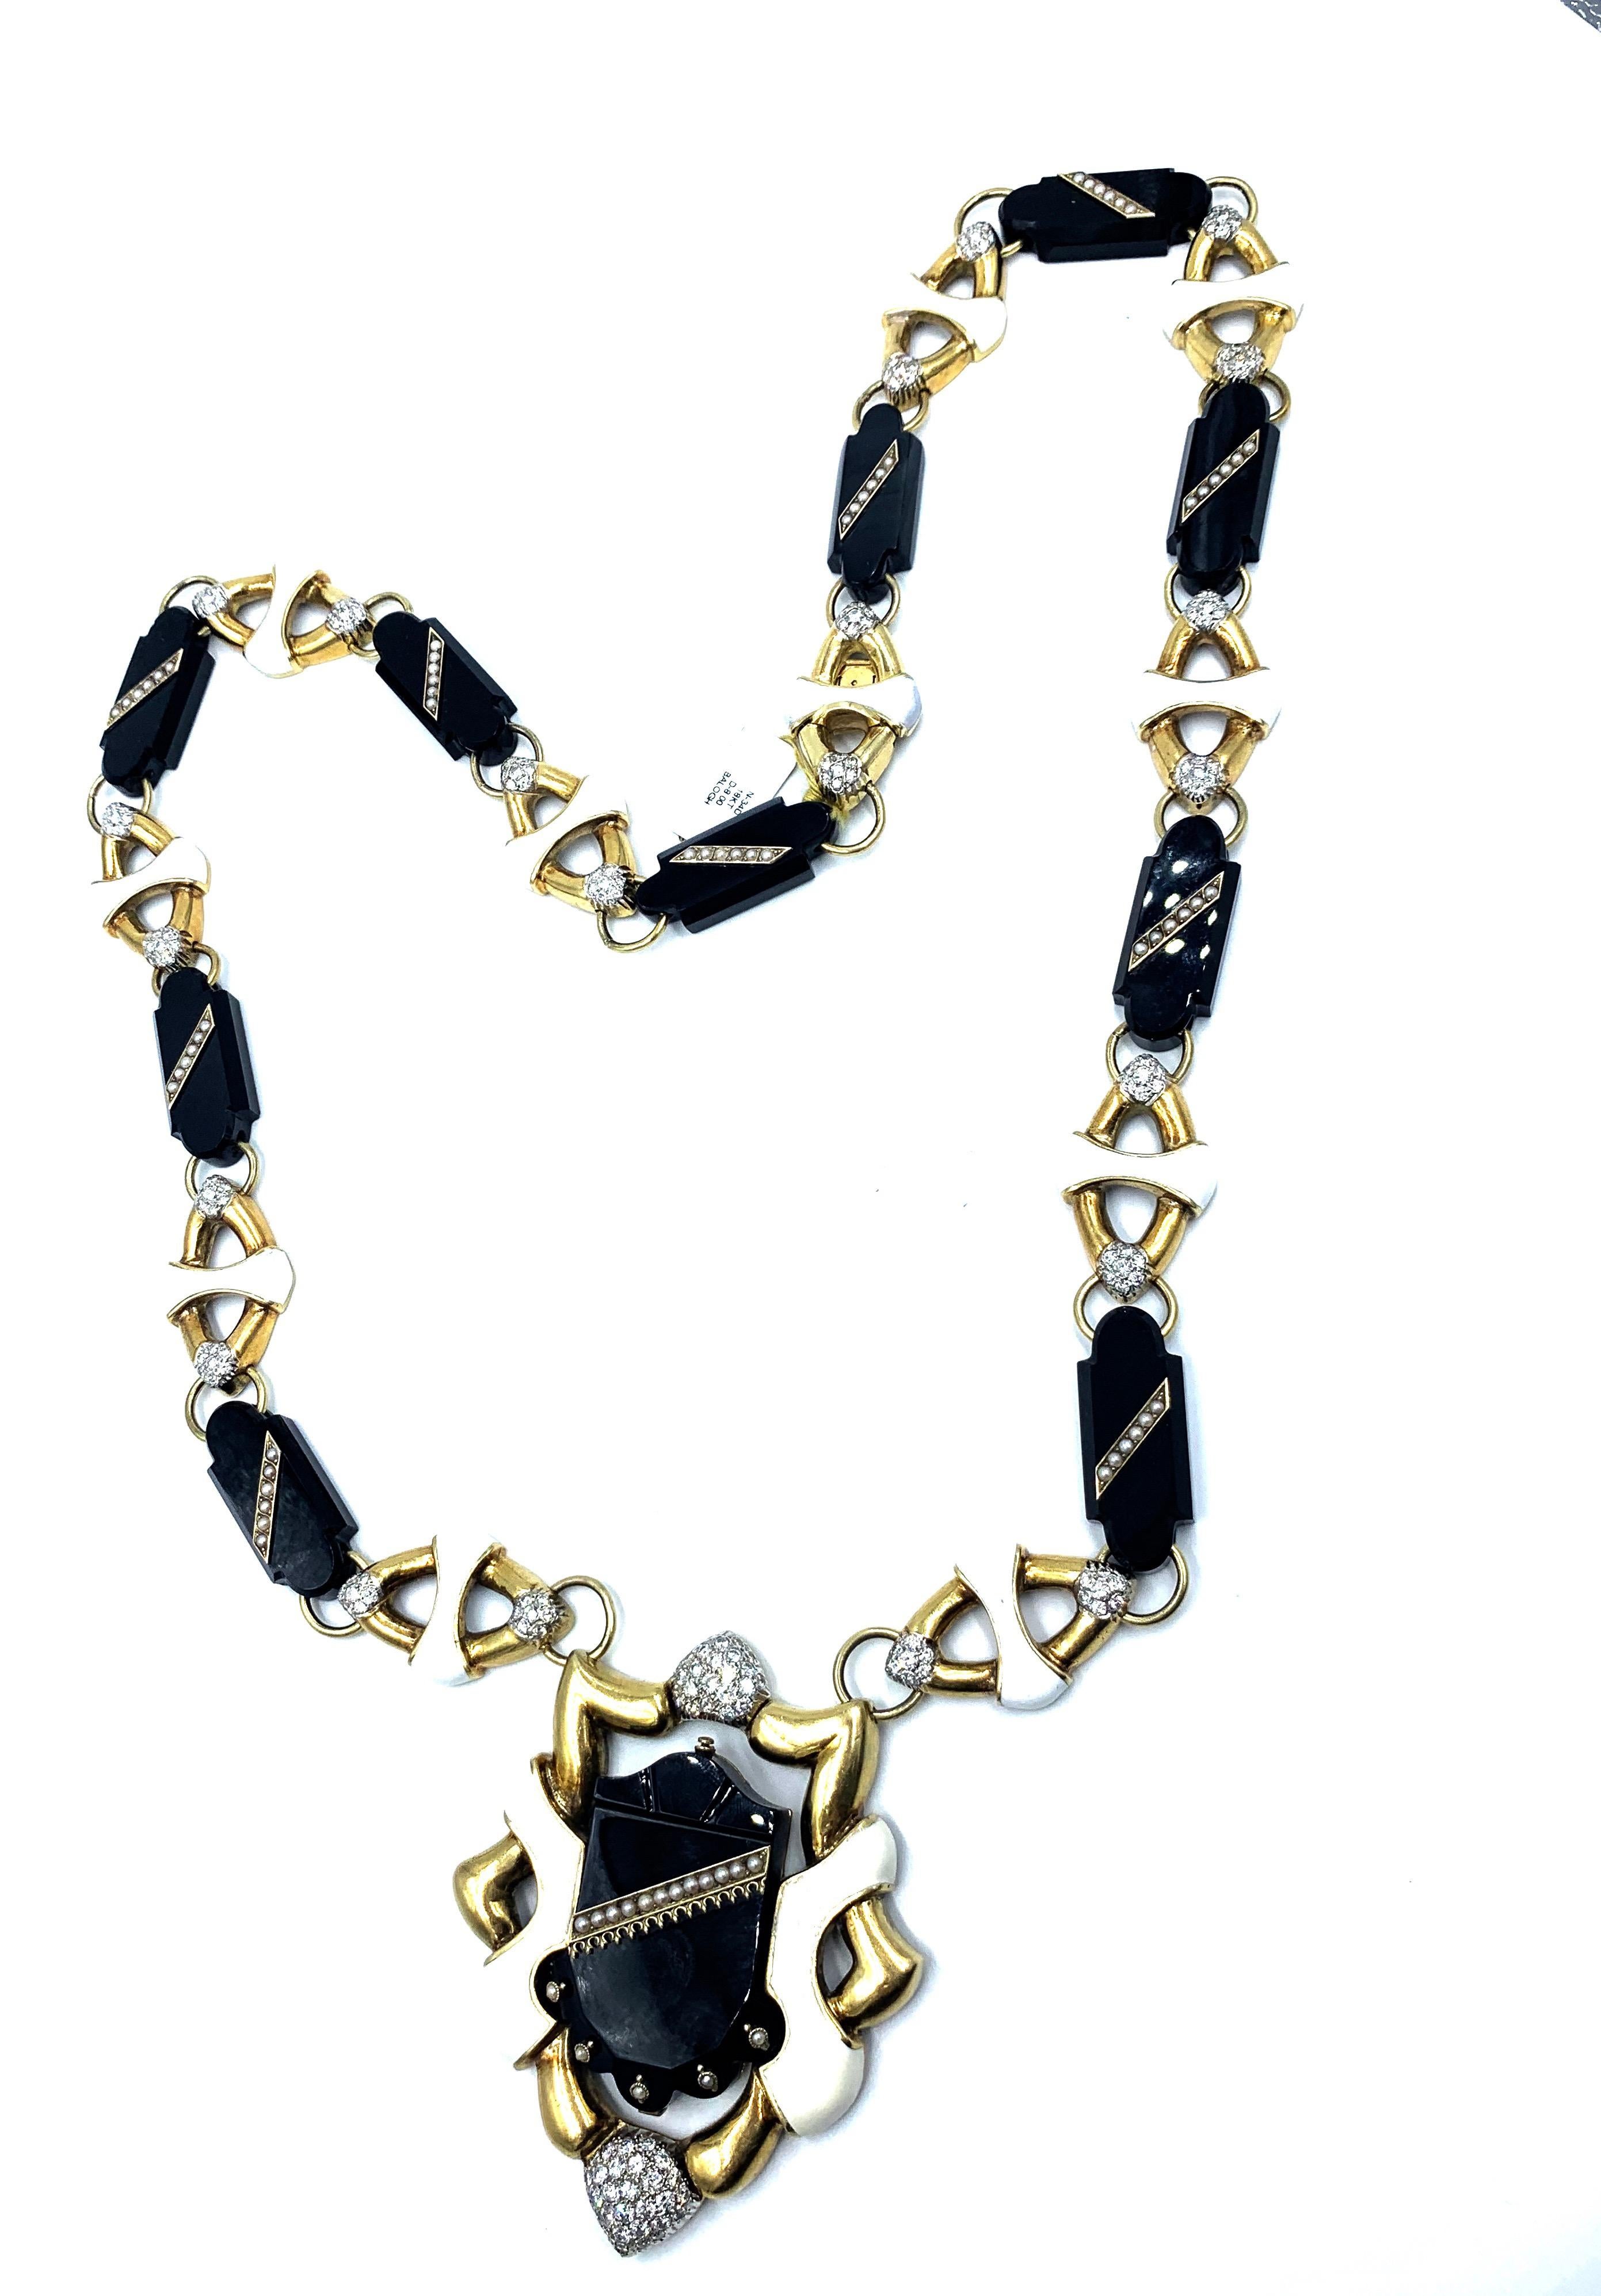 An impressive, long enamel diamond and onyx 18 kt yellow gold necklace from Balogh & Co Jewelers, Miami FL. The necklace has 8.00 carats of diamonds. The pendant is 3.25 in length, attached to a 31.5” necklace.